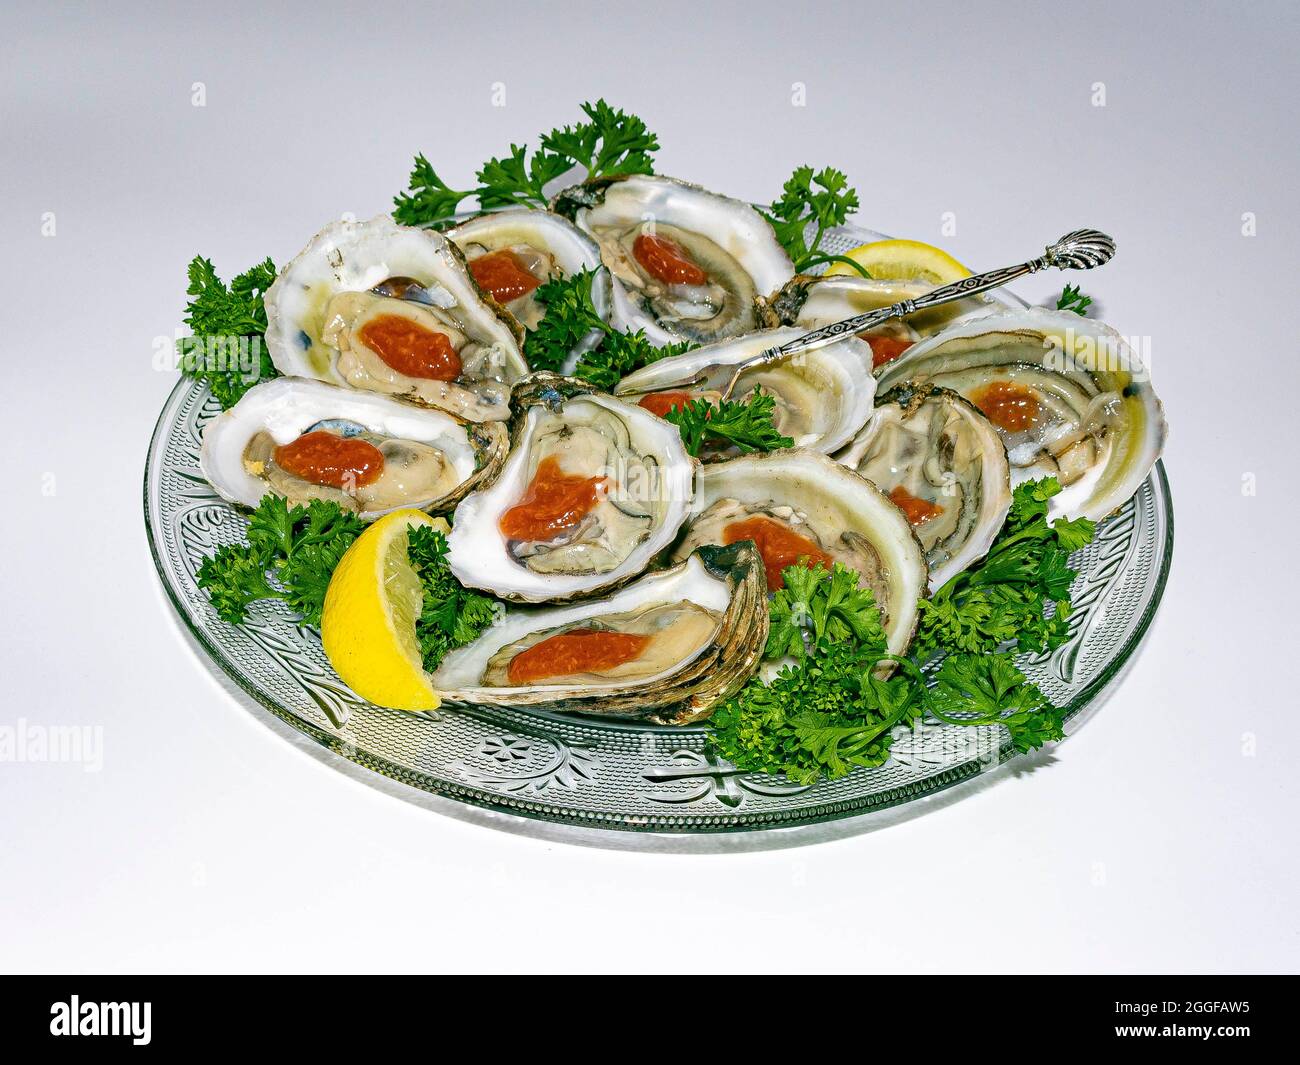 Round glass plate of freshly shucked oysters served with red cocktail sauce, yellow lemon and green curly parsley garnish. Stock Photo